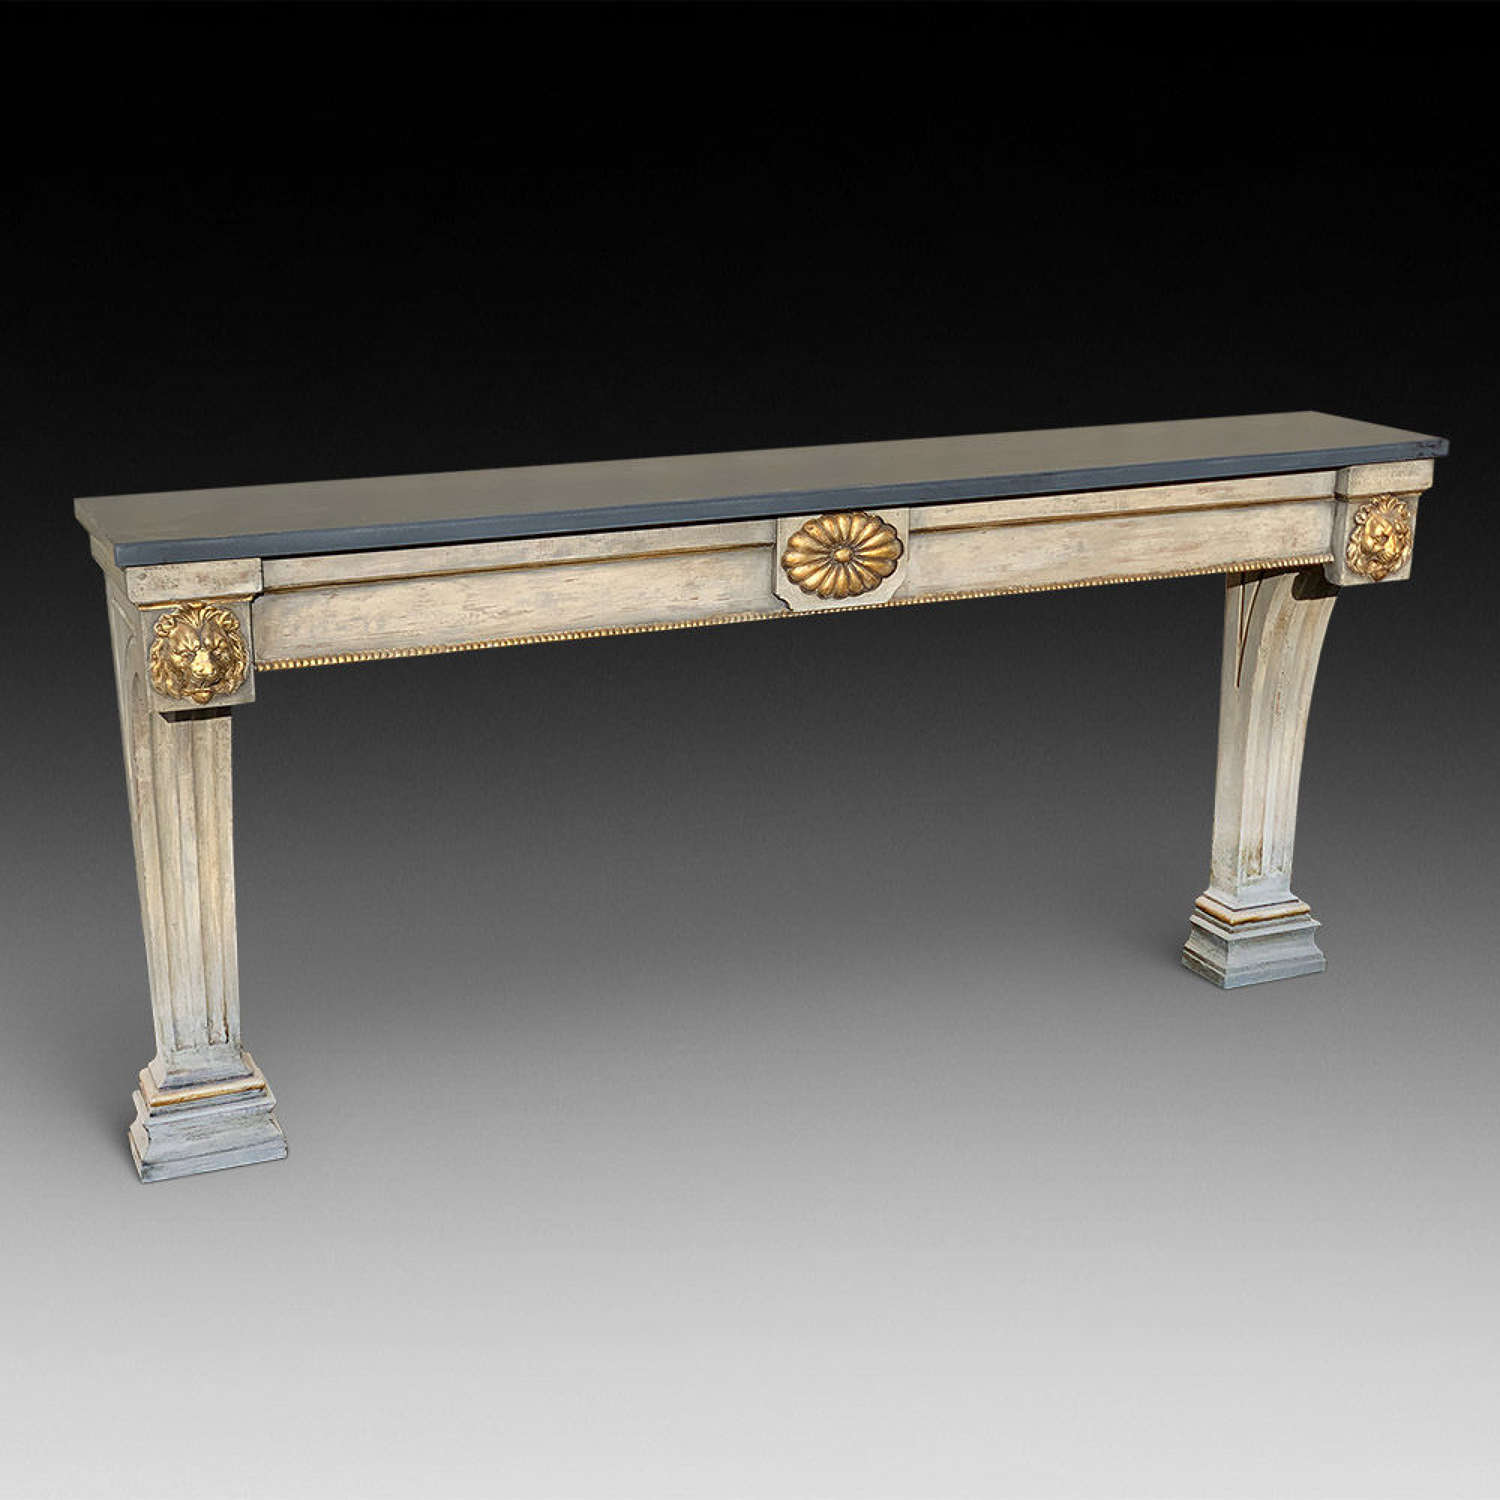 Highly Decorative Painted Console Table c.1810